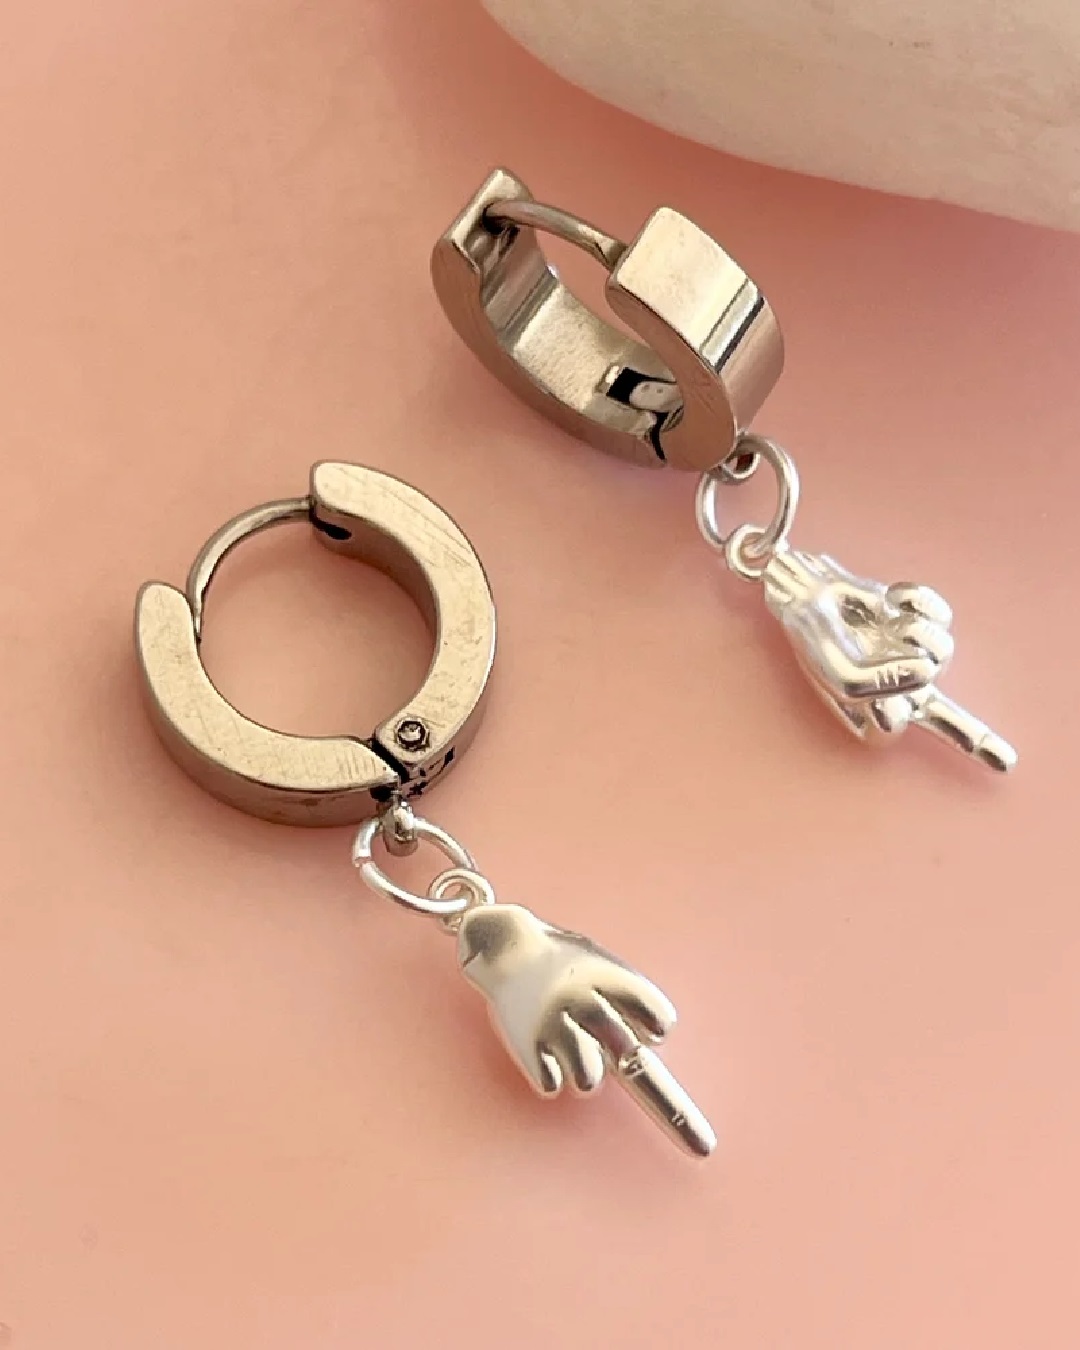 Silver middle finger charm hanging off gold hoop earrings